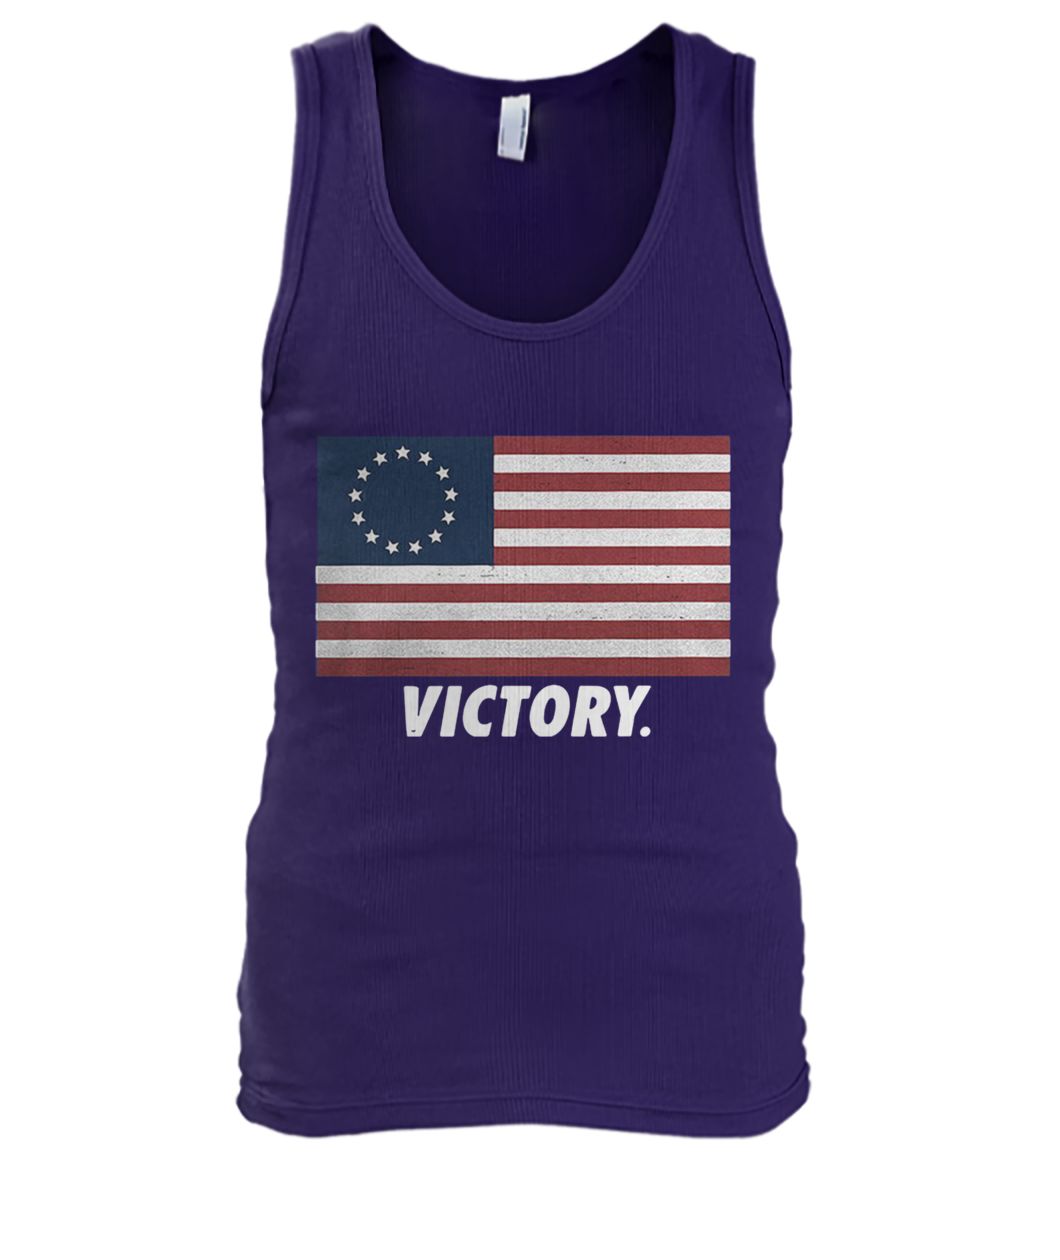 Betsy ross flag the first american flag victory men's tank top